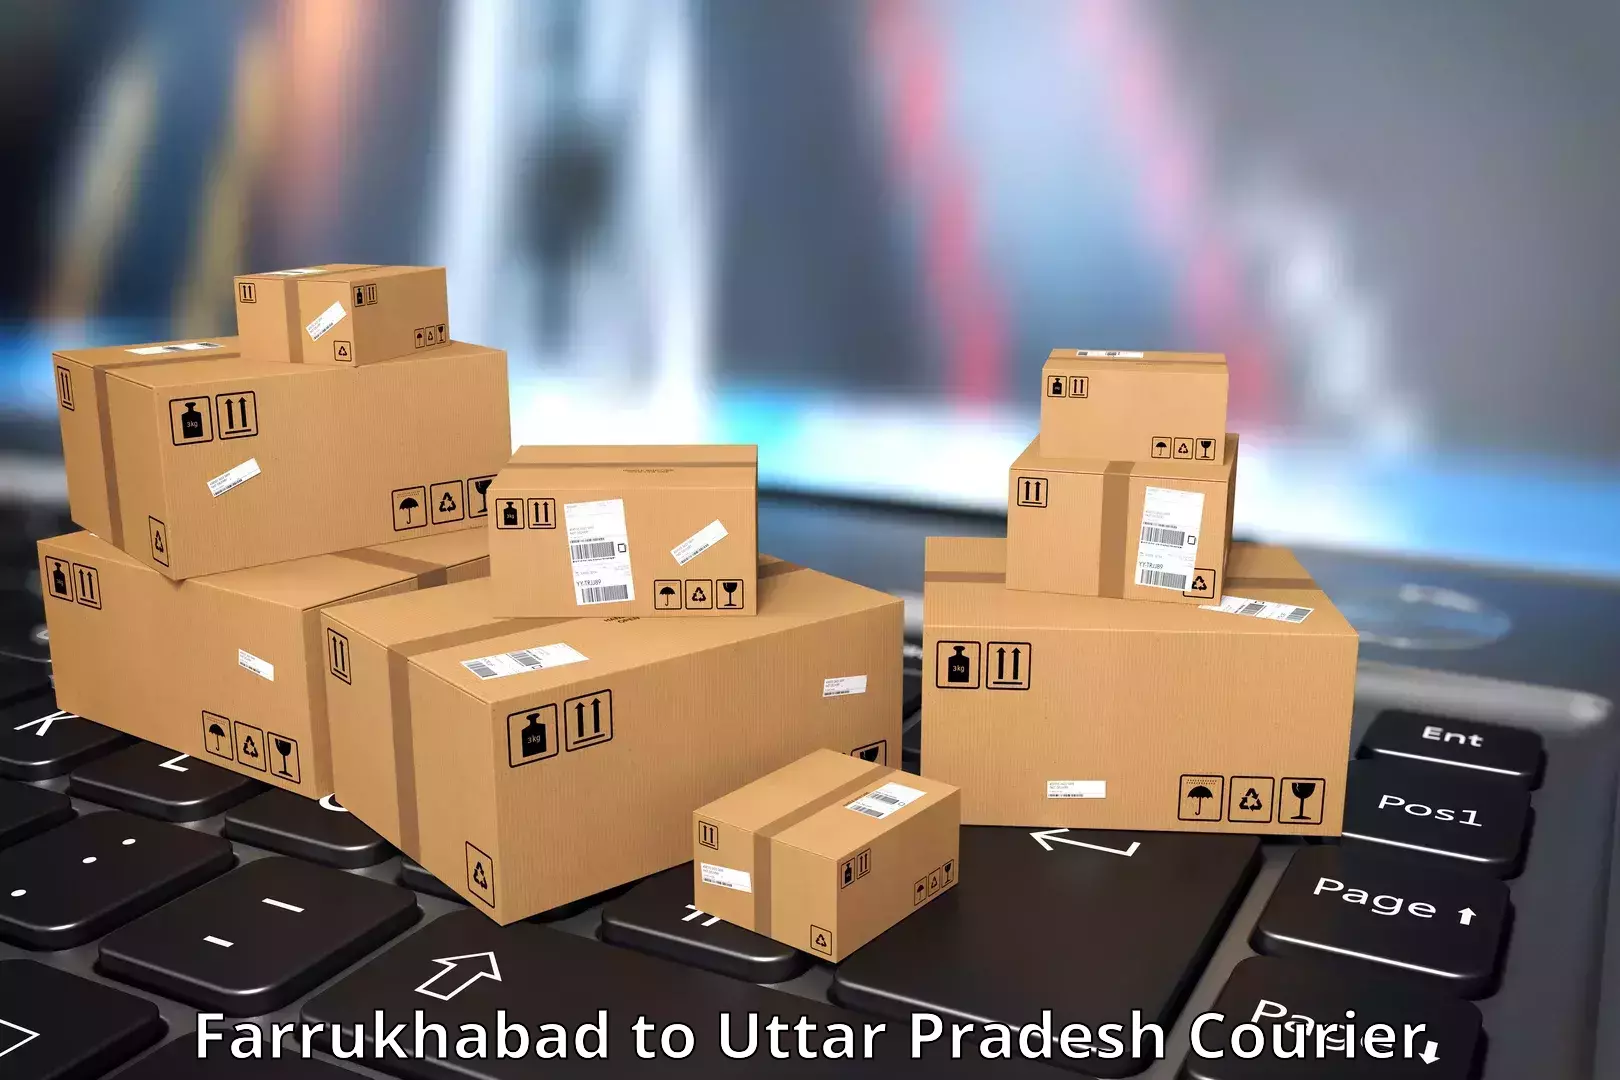 Courier insurance Farrukhabad to Fatehabad Agra